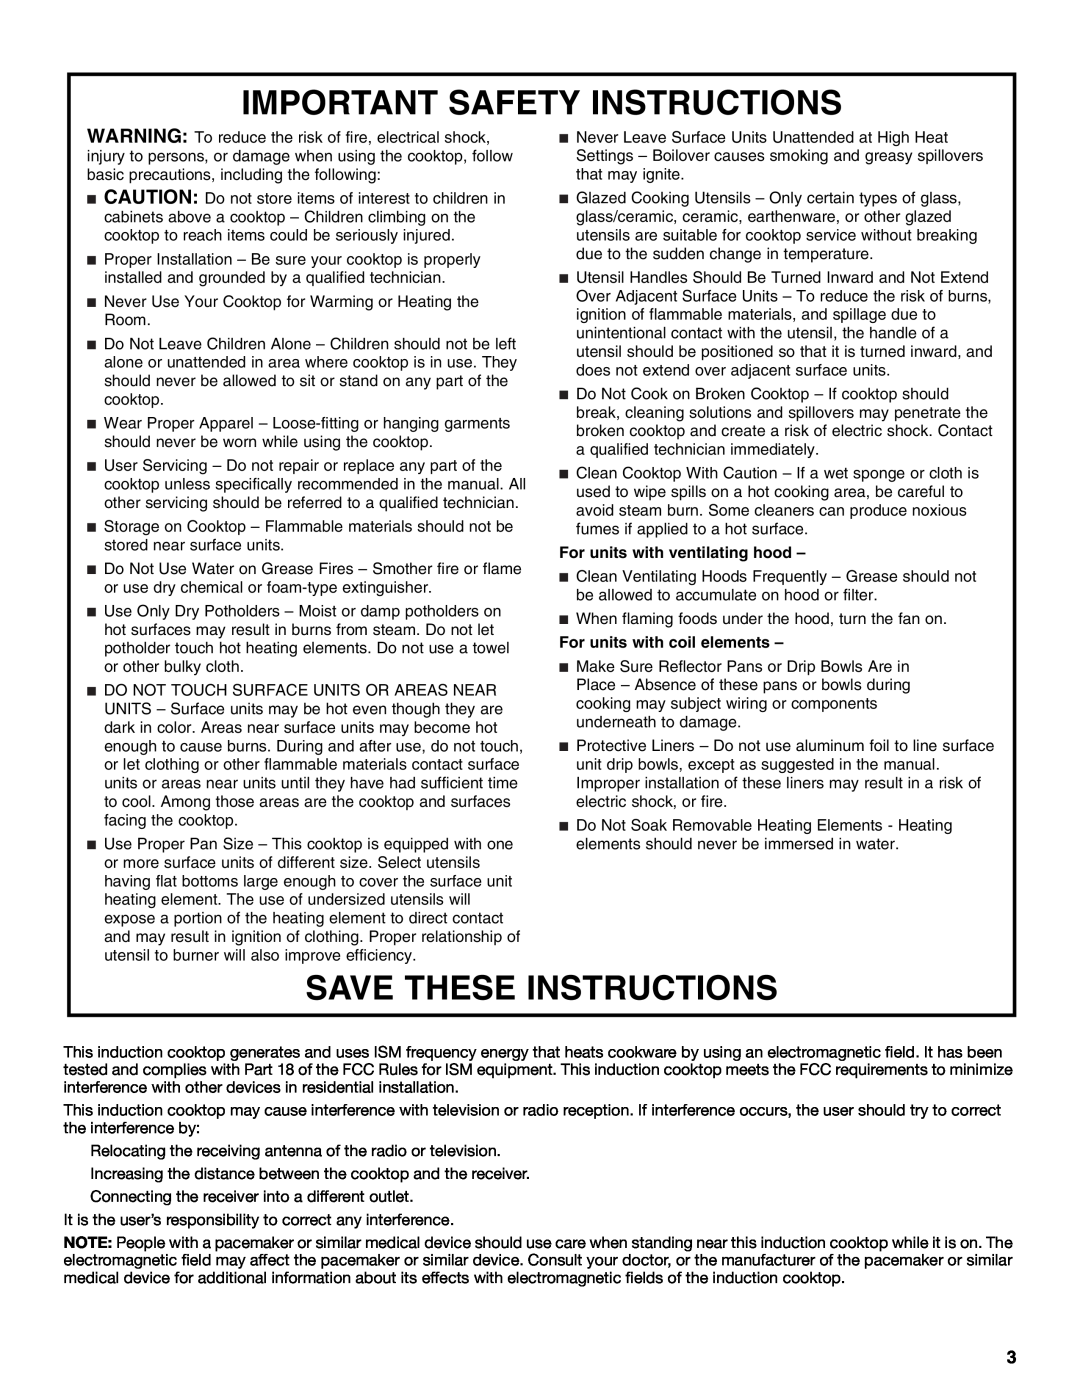 KitchenAid KICU568S, KICU508S manual Important Safety Instructions, Save These Instructions, For units with ventilating hood 